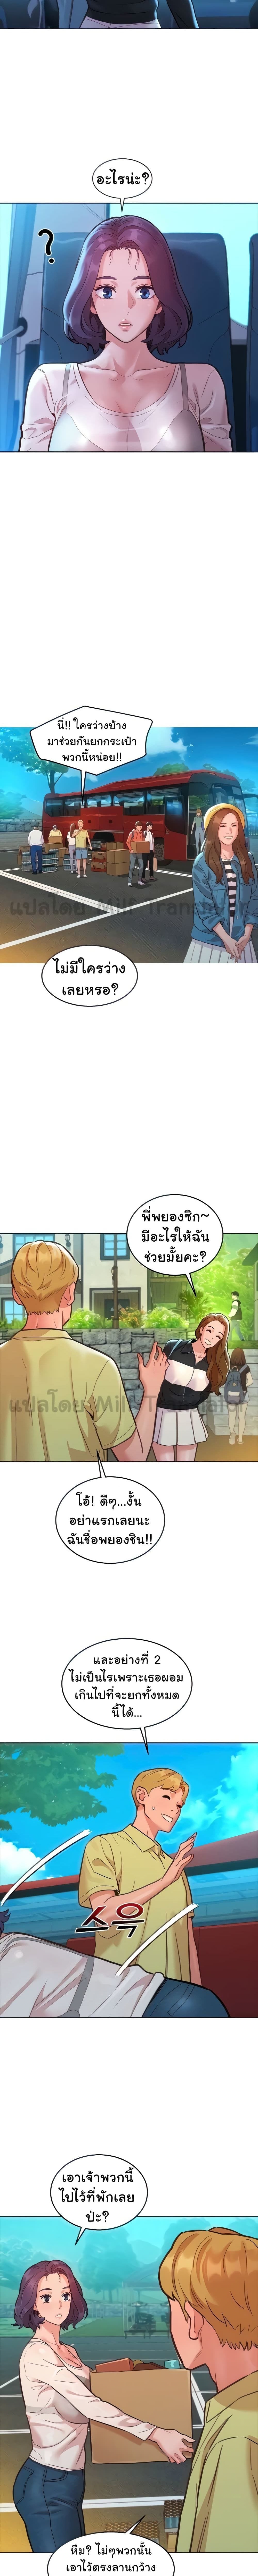 Let’s Hang Out from Today ตอนที่ 33 ภาพ 3